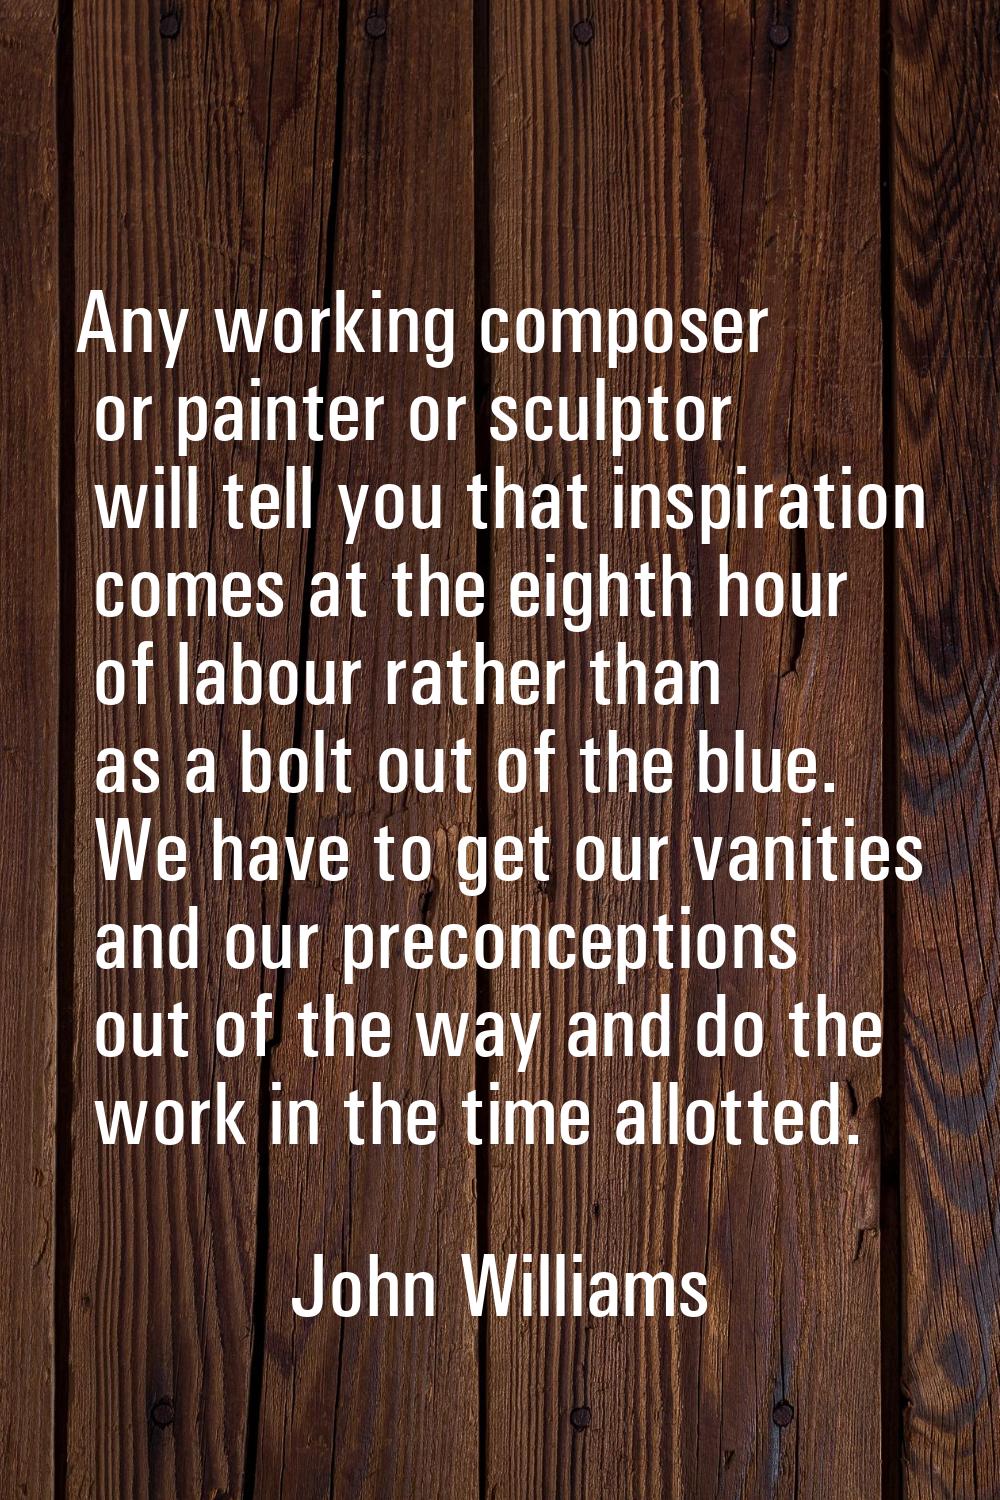 Any working composer or painter or sculptor will tell you that inspiration comes at the eighth hour